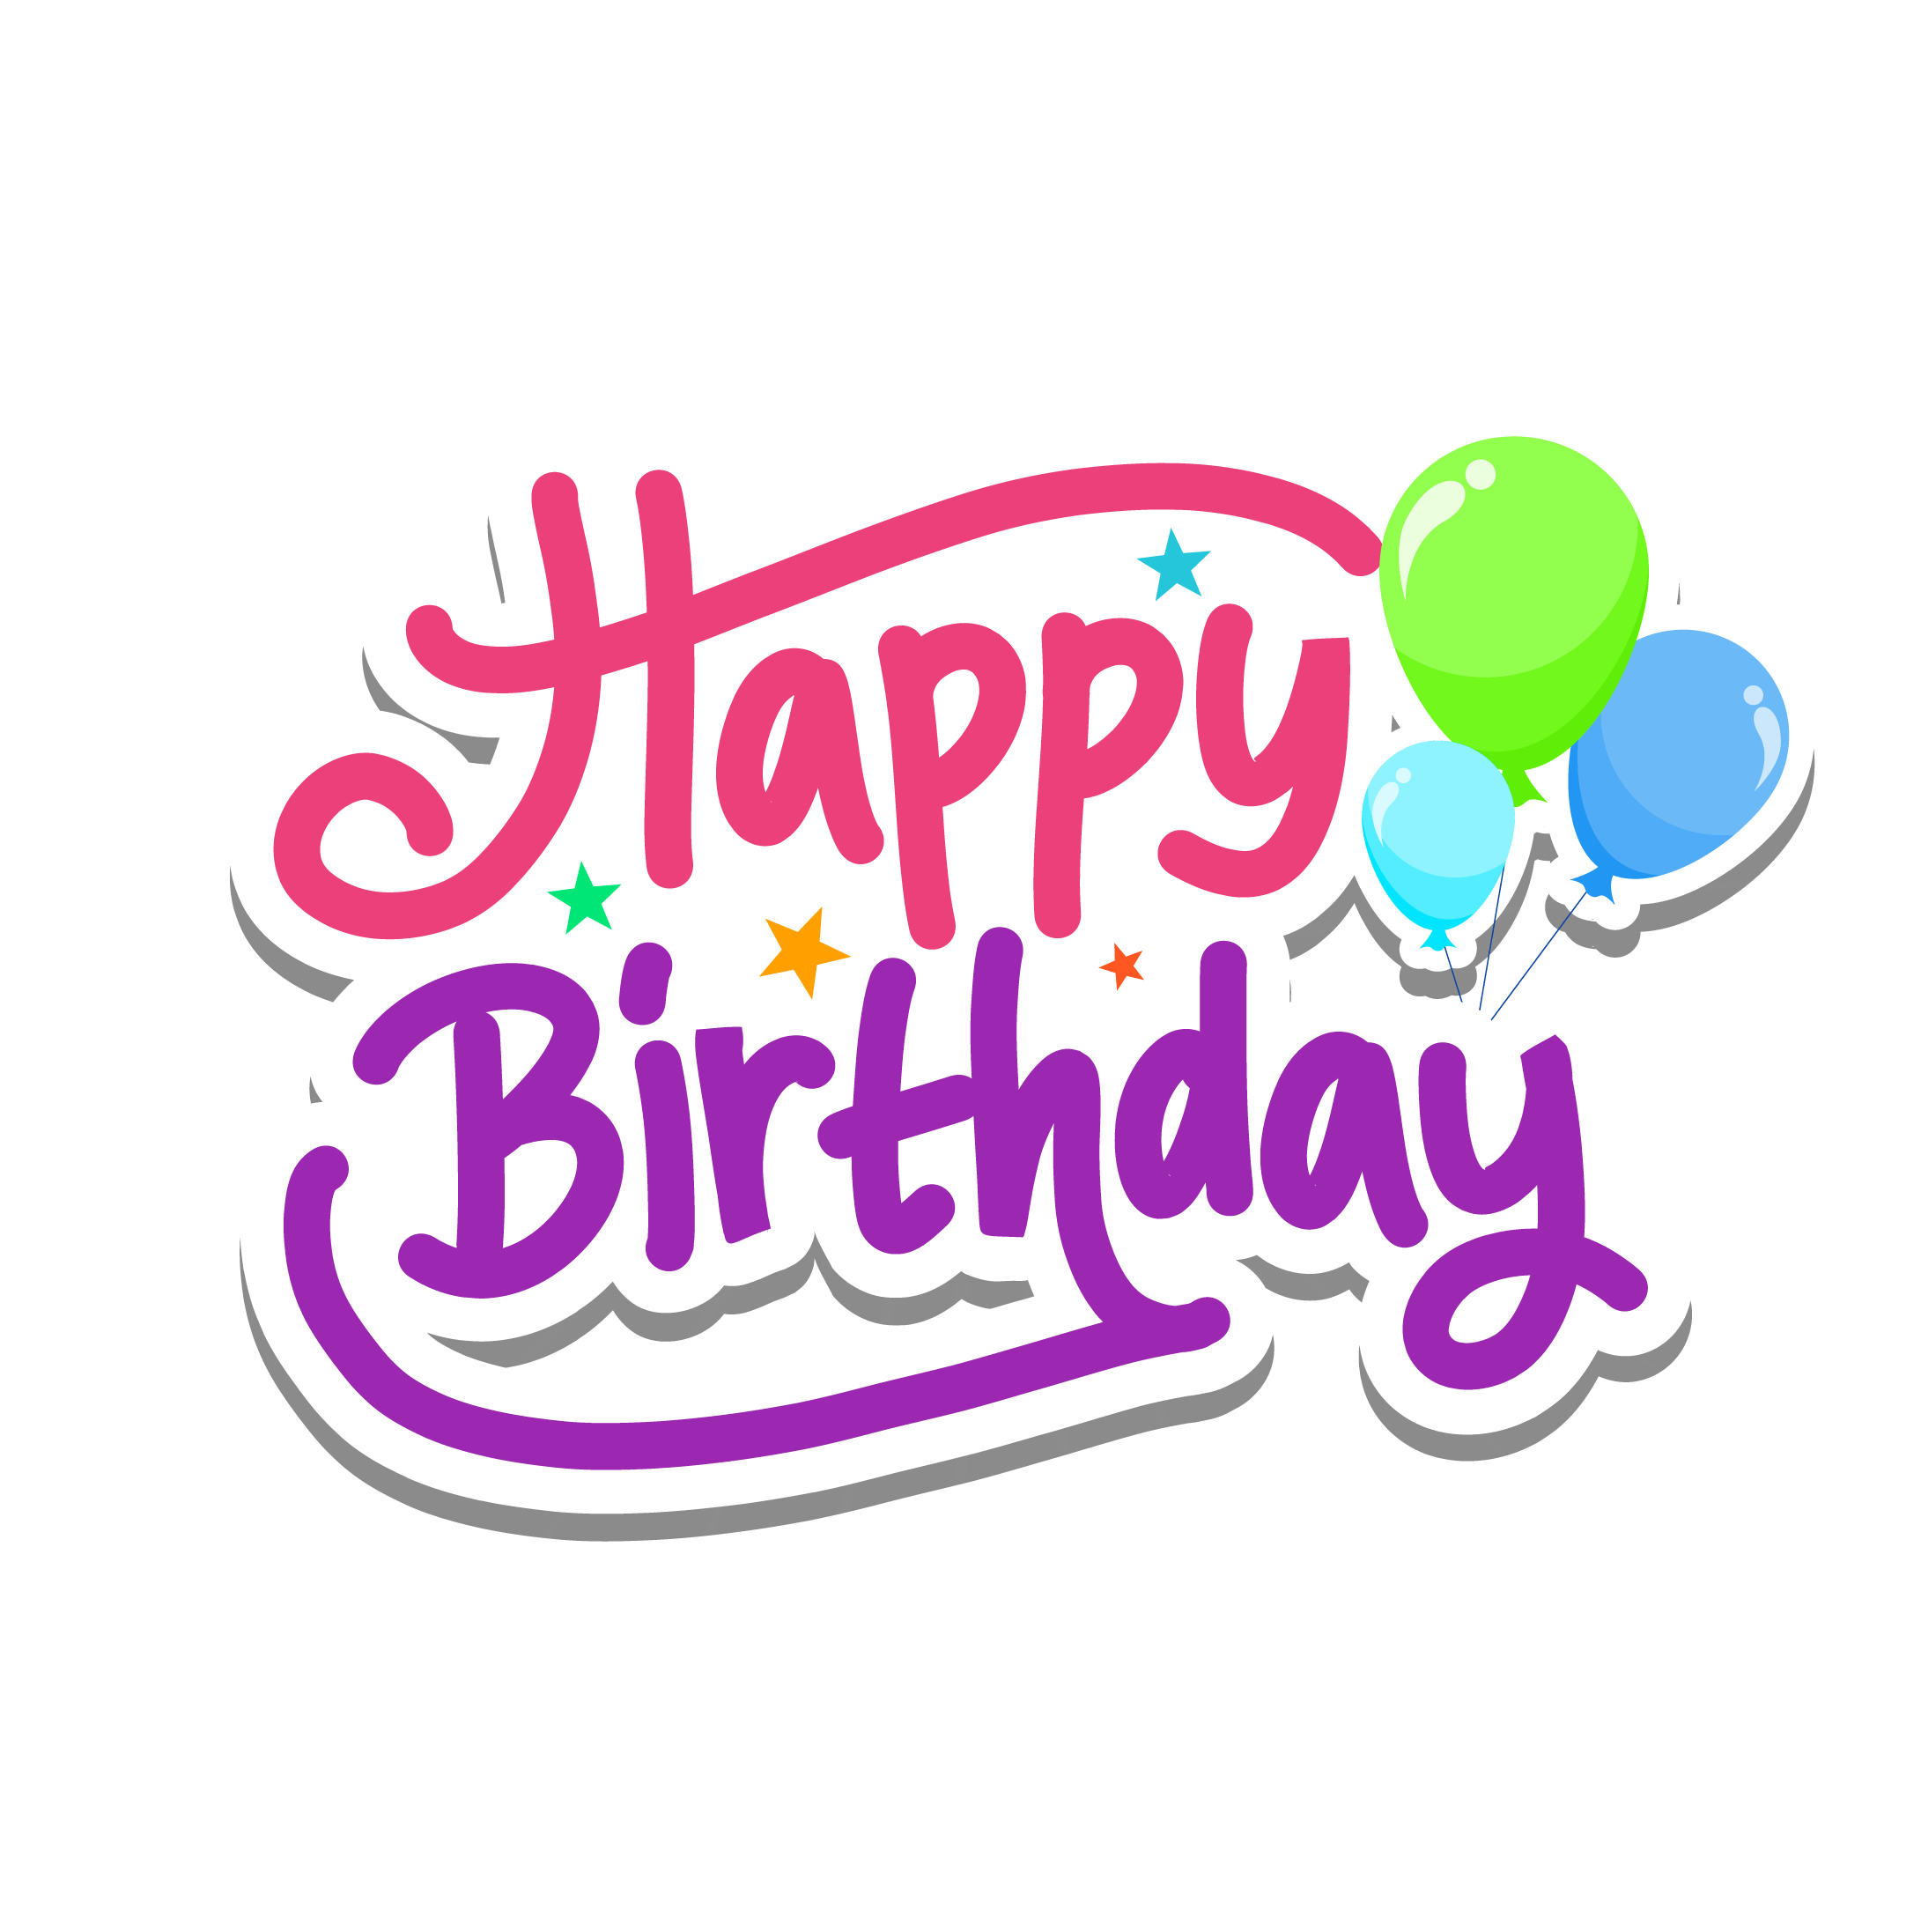 Download 2192 X 2204 62 - Happy Birthday Purple And Pink PNG Image with ...